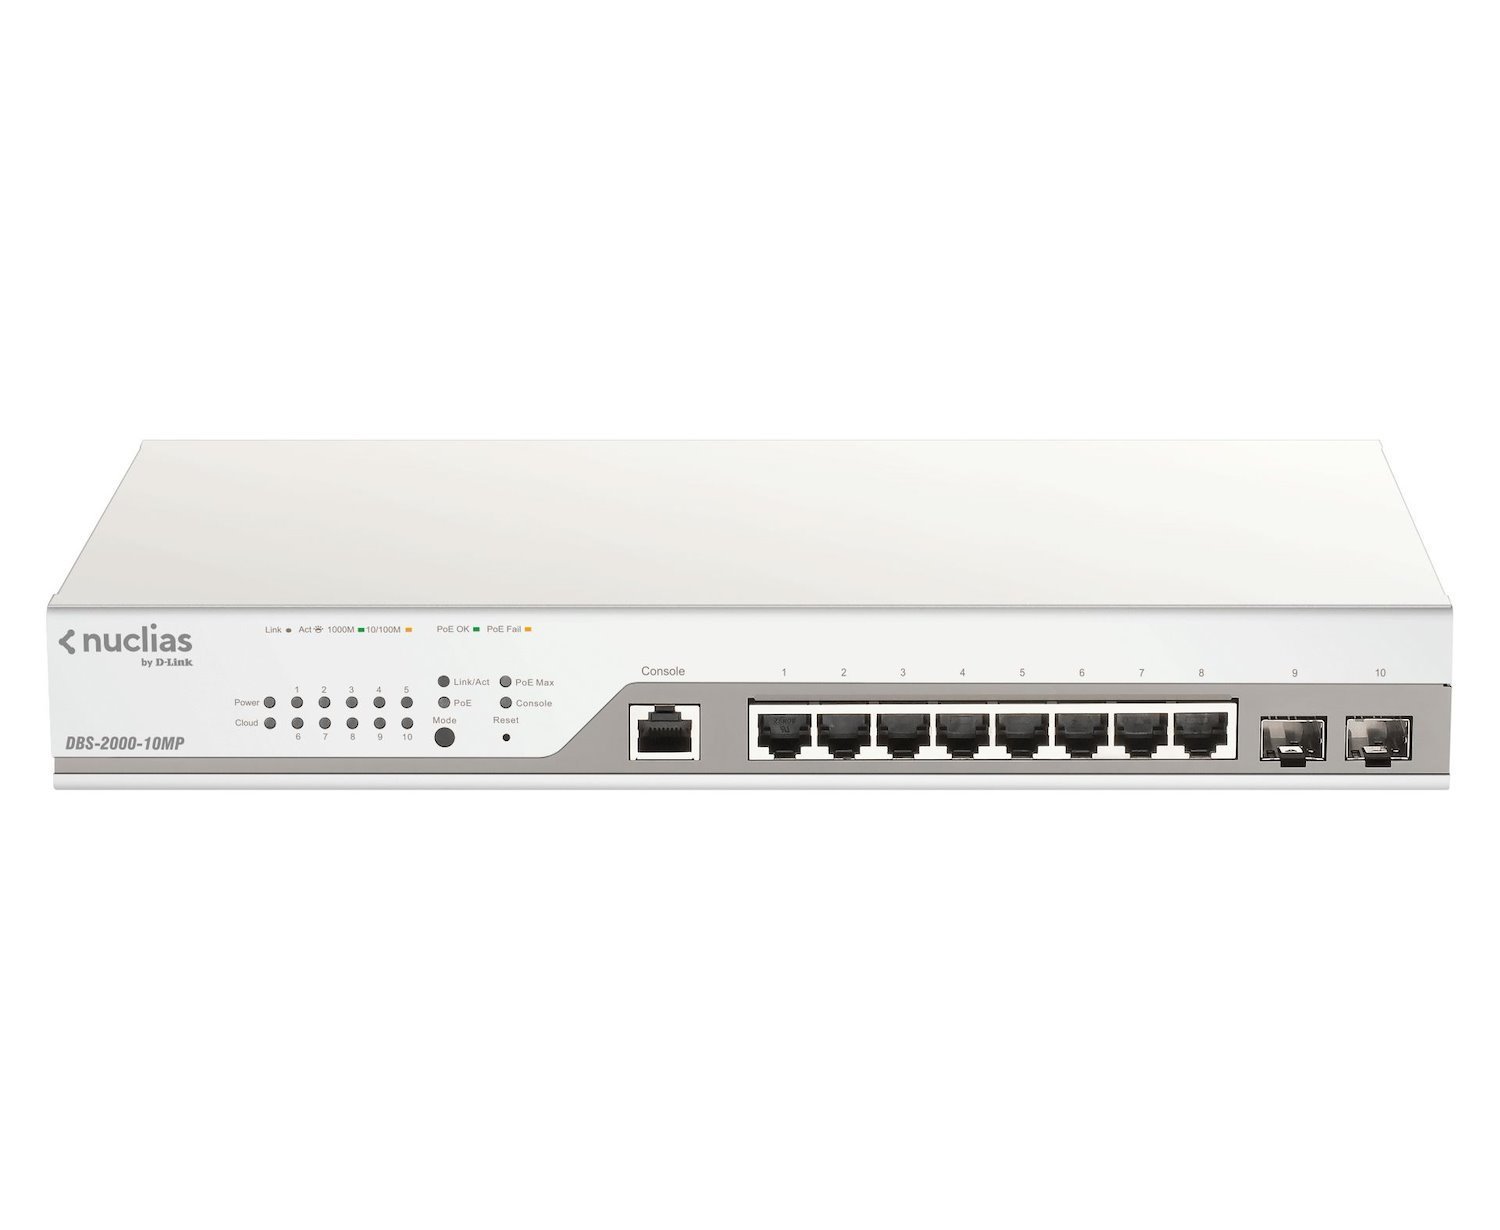 D-Link Dbs-2000-10Mp/E Network Switch Managed L2 Gigabit Ethernet [10/100/1000] Power Over Ethernet [PoE] Grey (10-Port Gigabit PoE+ Nuclias - Smart Managed Switch - Including 2X SFP Ports [With 1 Yea